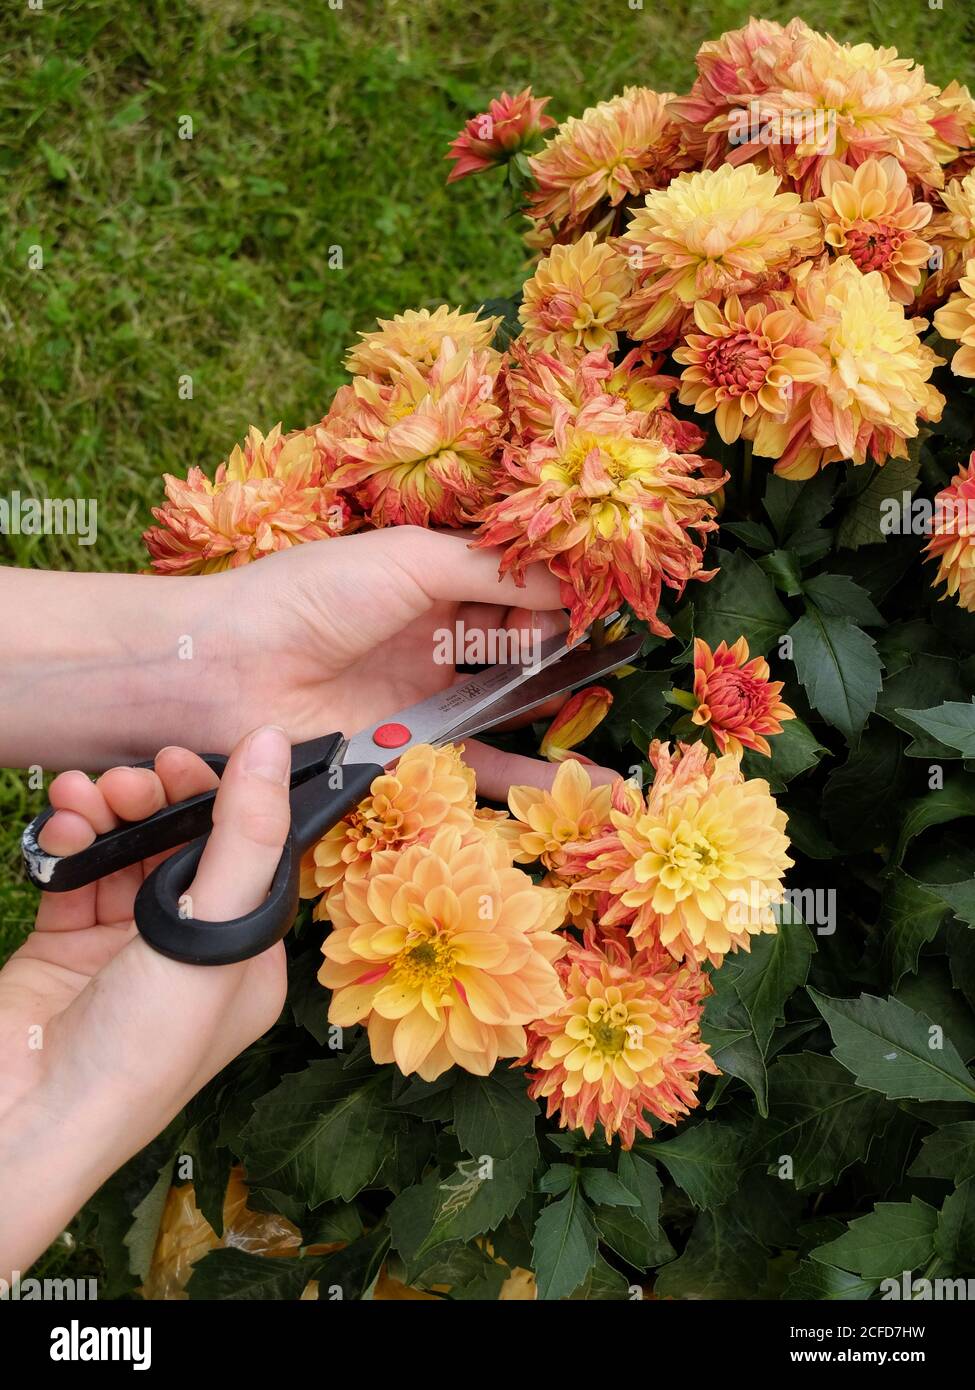 Remove faded flowers from a dahlia, garden practice Stock Photo